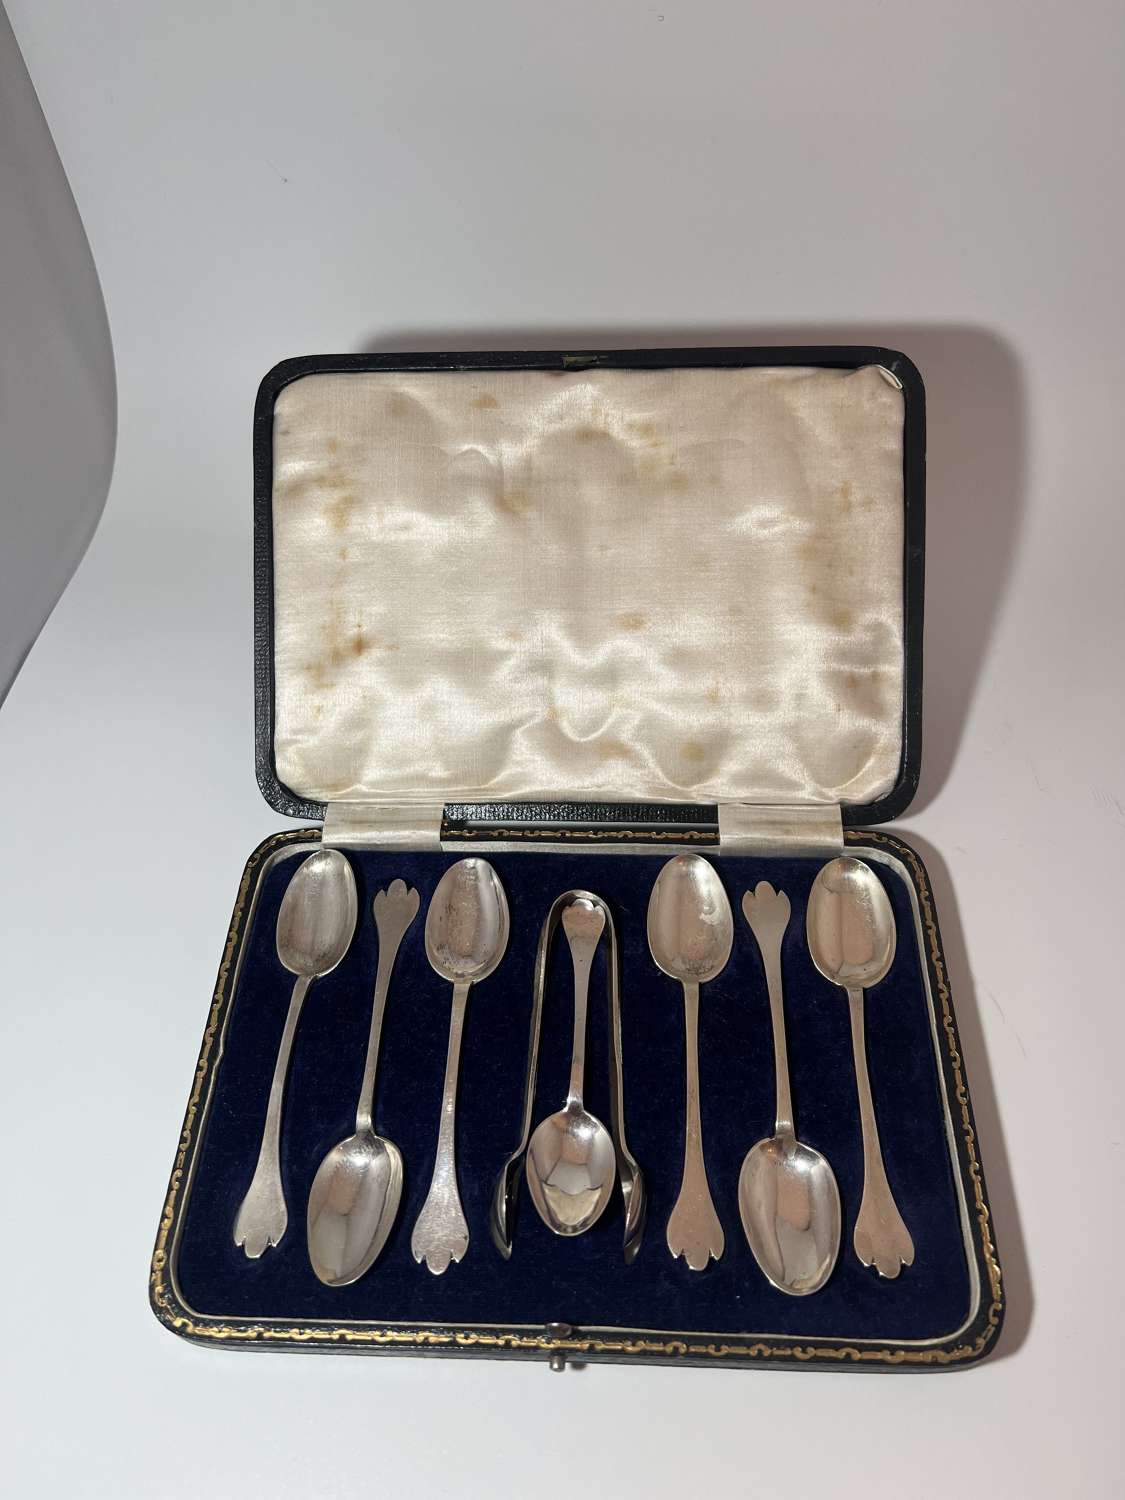 A set of six solid silver teaspoons